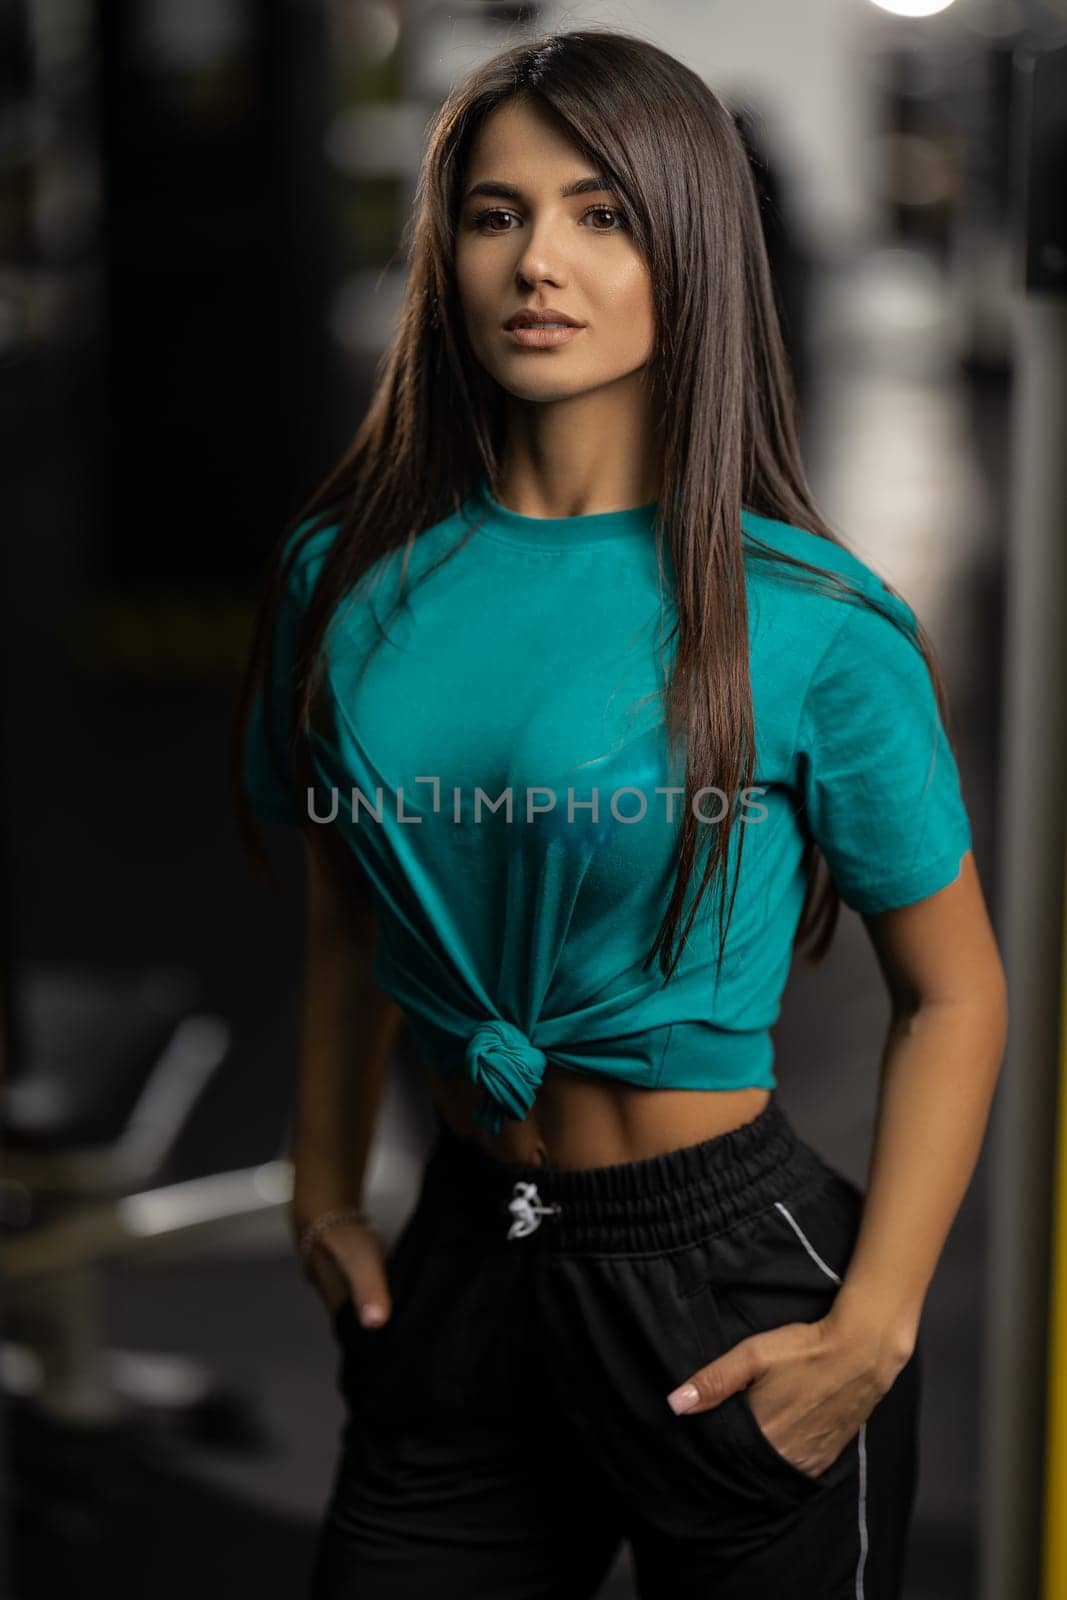 Sexy young woman fitness model with sexy abs posing in the gym with her hands in her pants pockets. Healthy athletic female body in modern sportswear